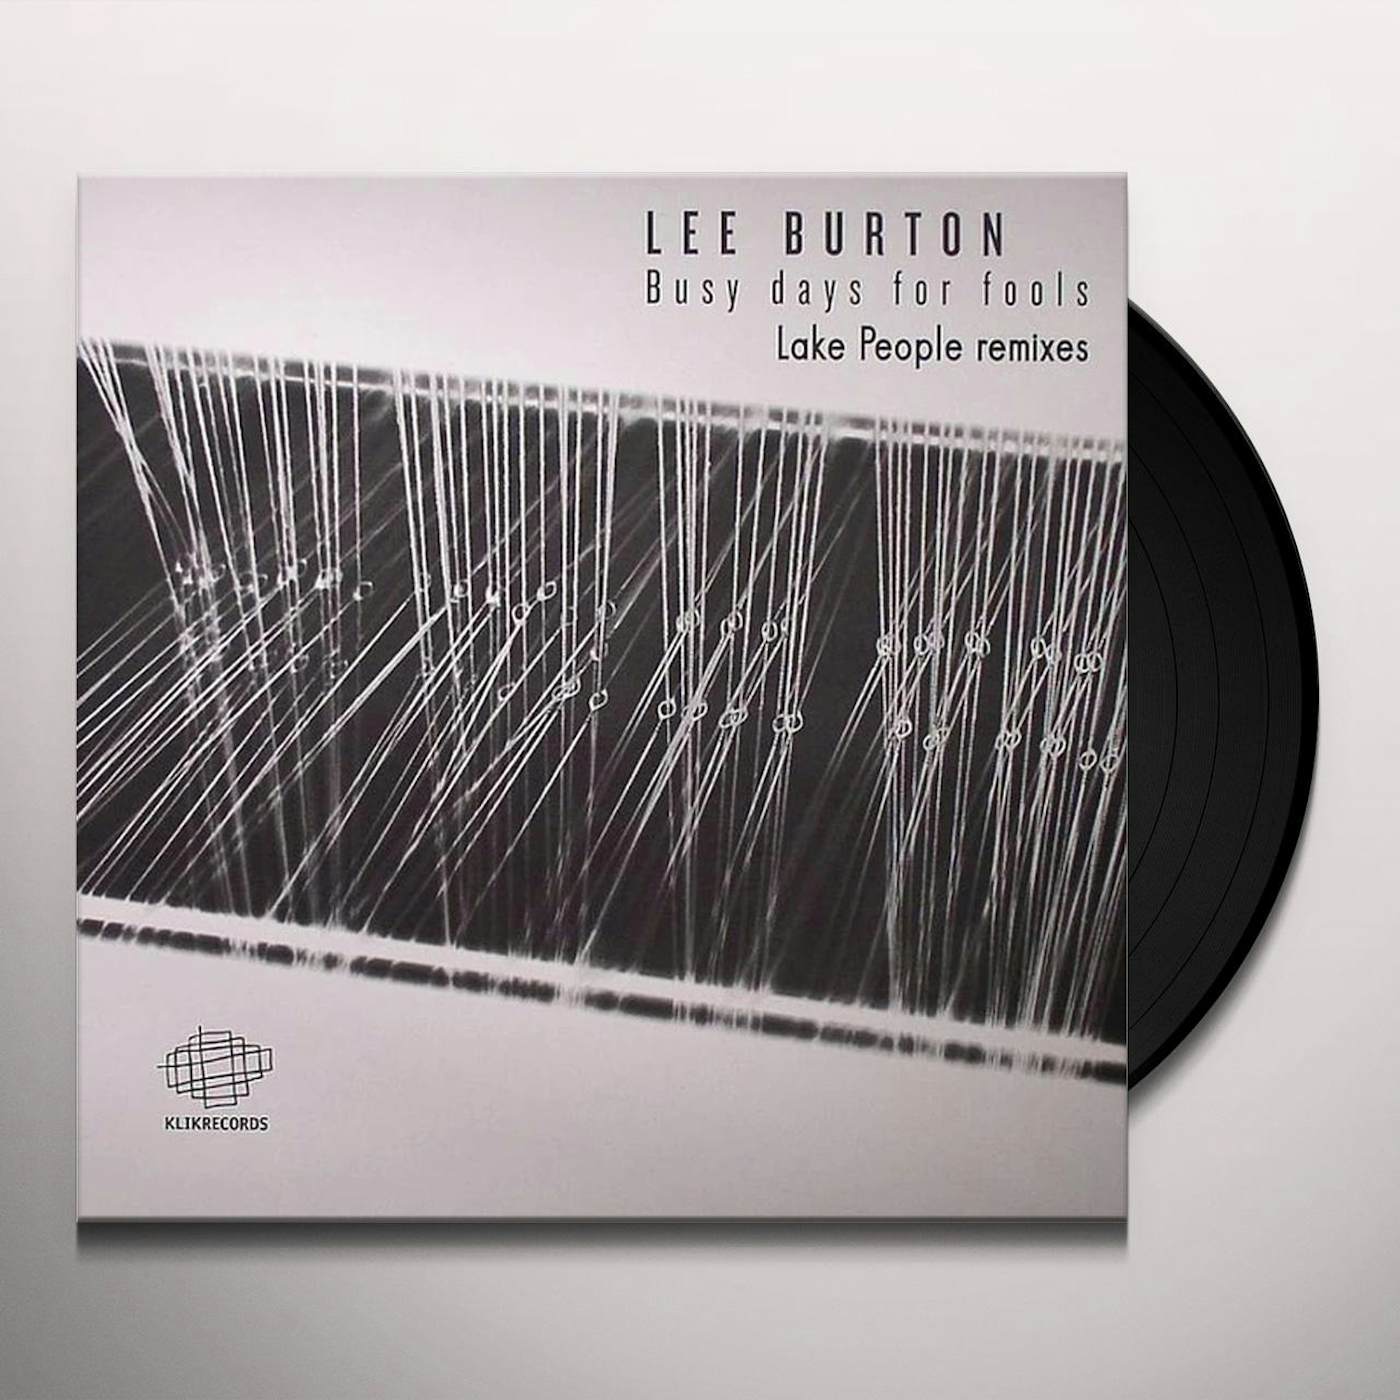 Lee Burton Busy Days For Fools (Lake People Remixes) Vinyl Record